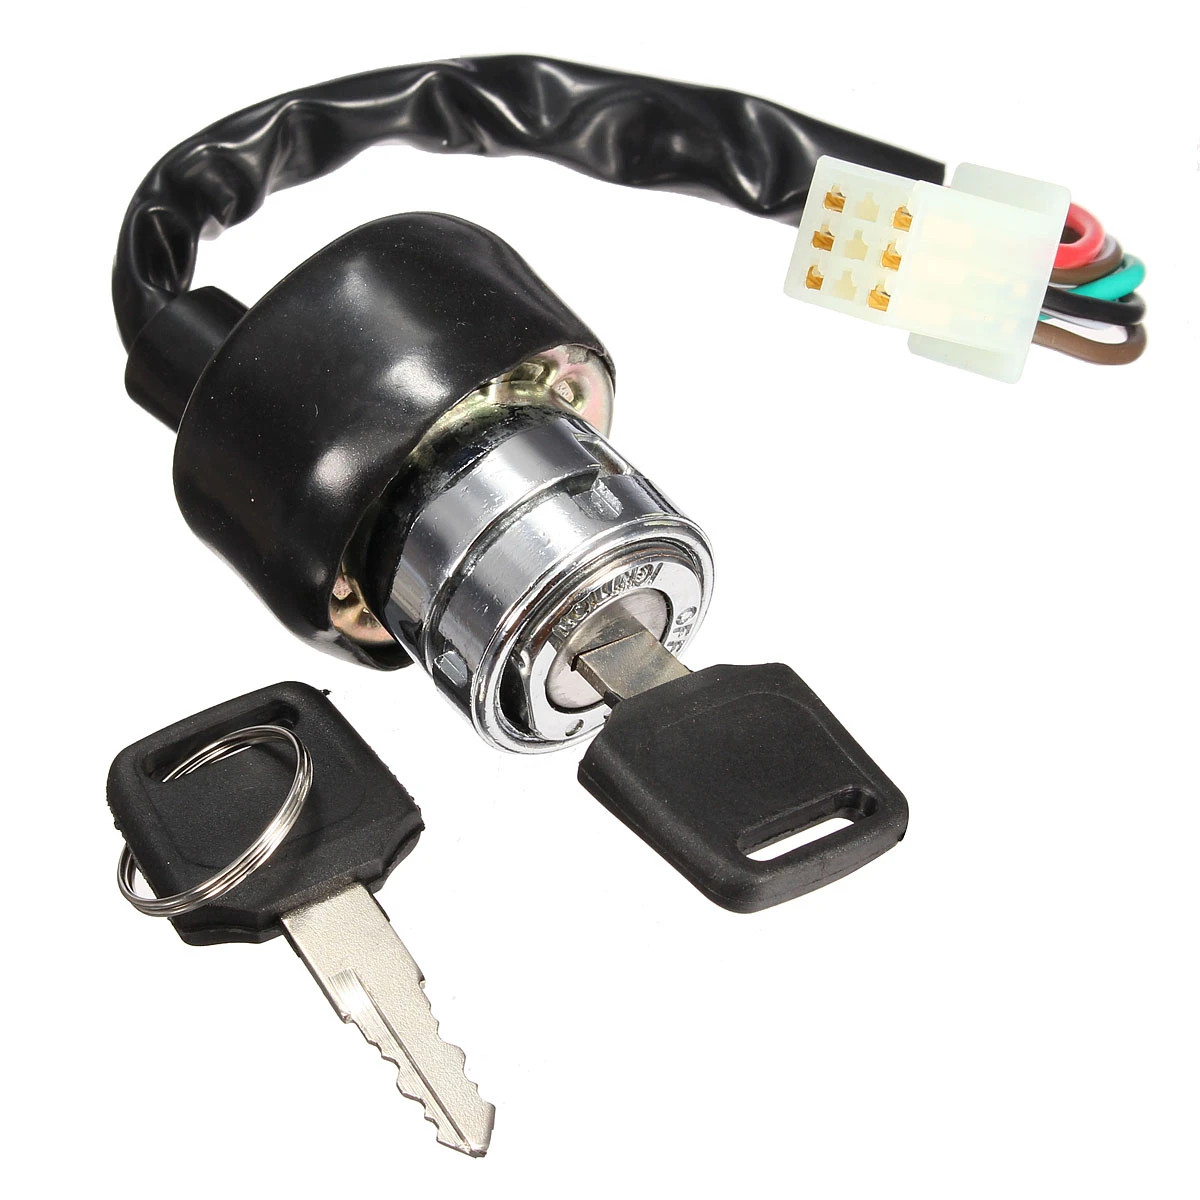 6 wire Ignition Switch Gas Scooter ATV Motorcycle Dirt Bike GY6 Falcon Moped UTV